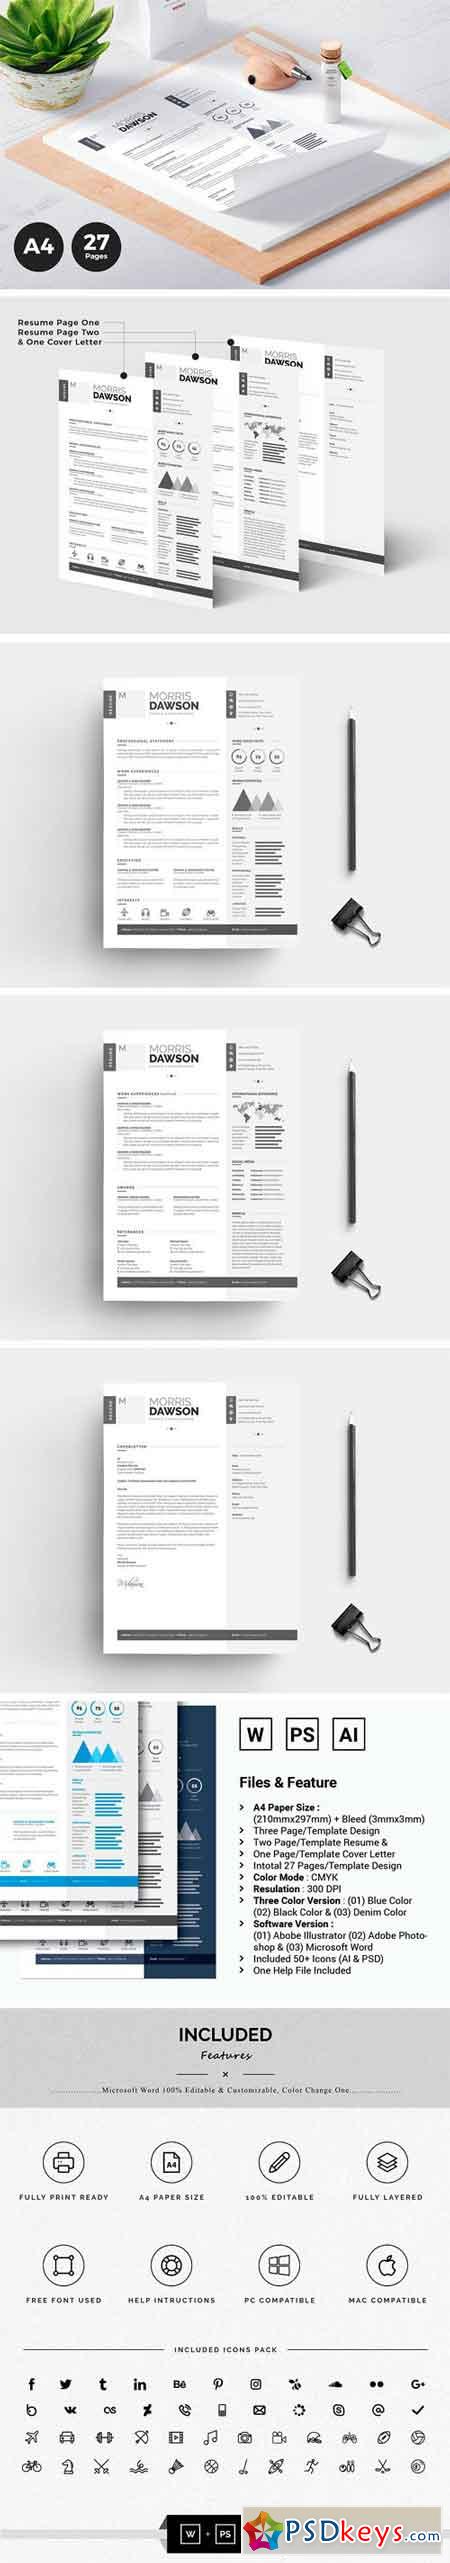 Clean Infographic Resume CV 1604669